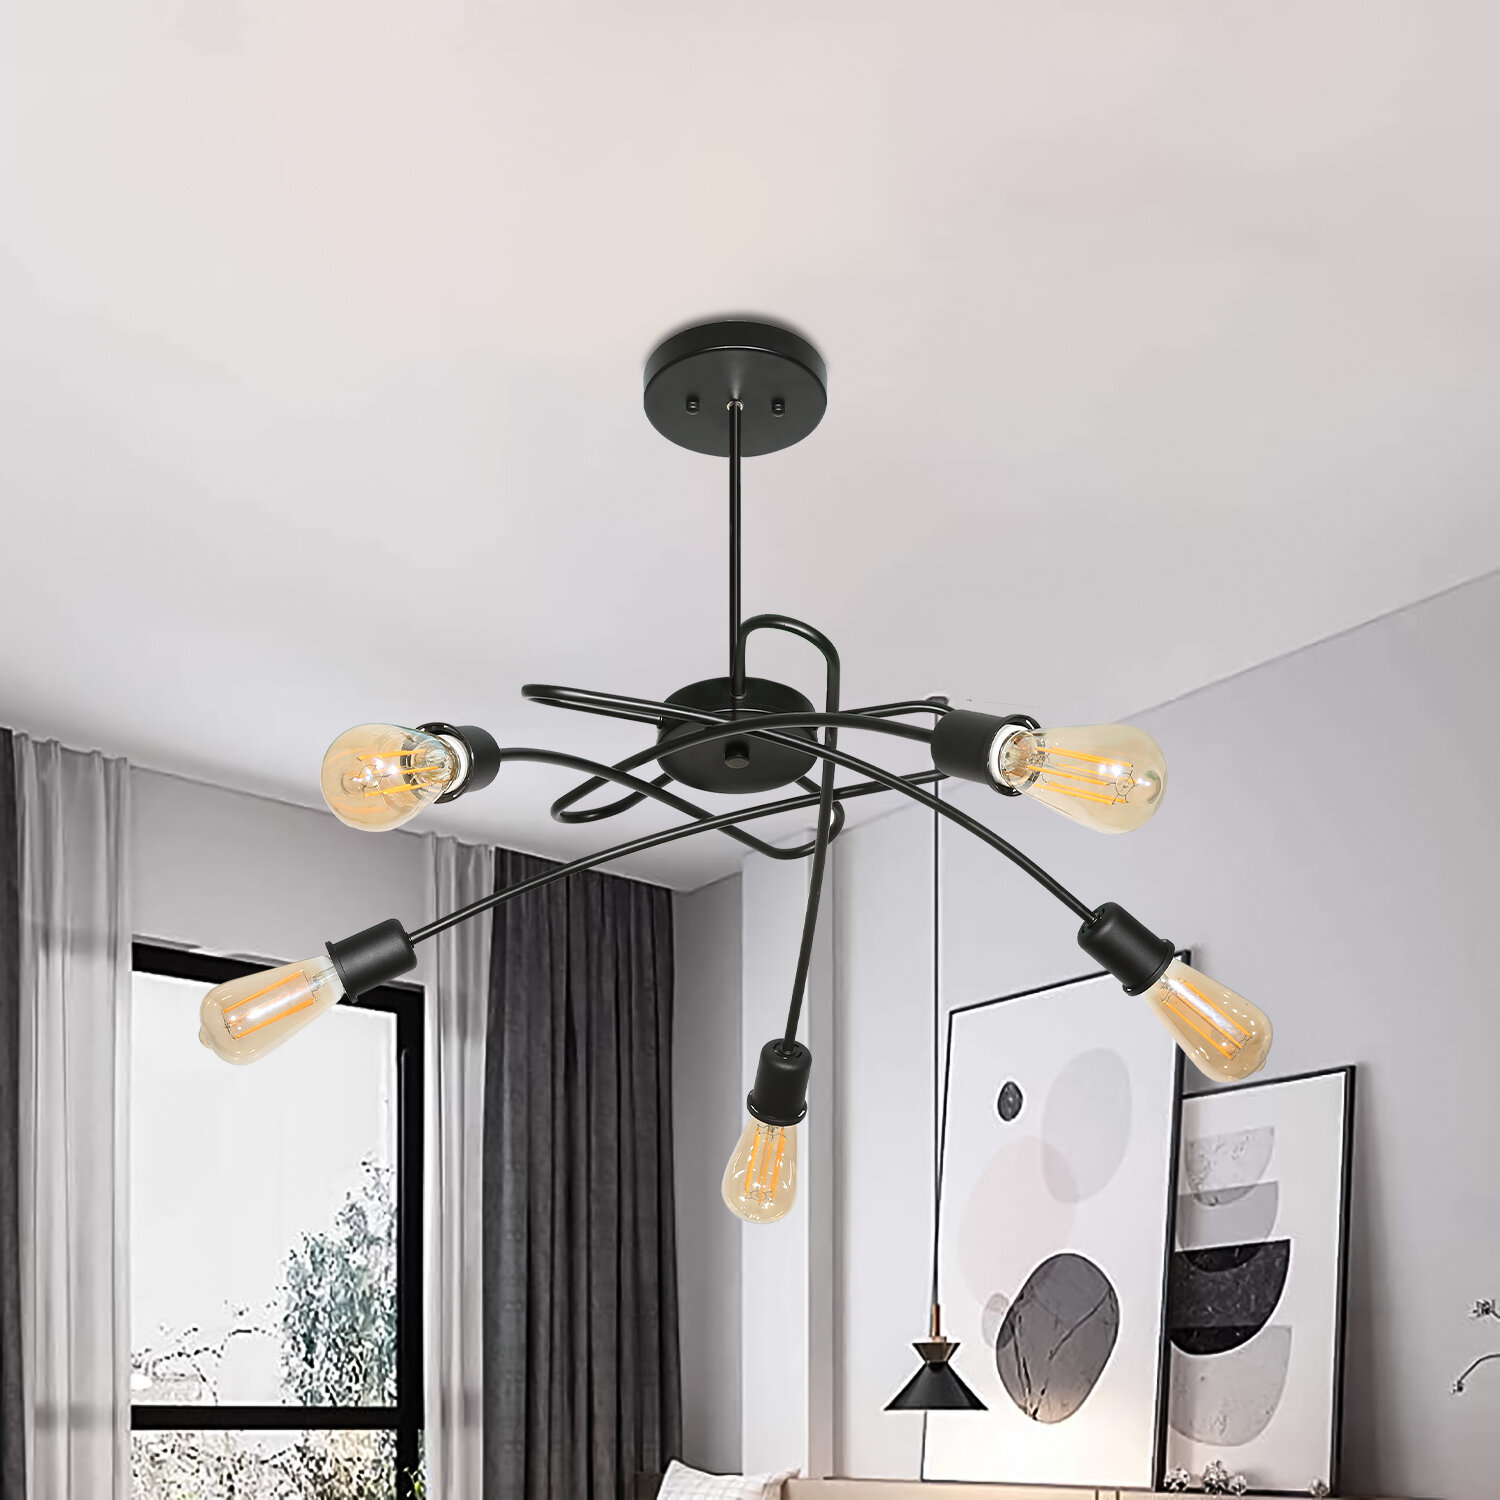 CONTEMPORARY STYLE METAL CEILING PENDANT LAMP BLACK KITCHEN LIGHT 5 IN NUMBER 